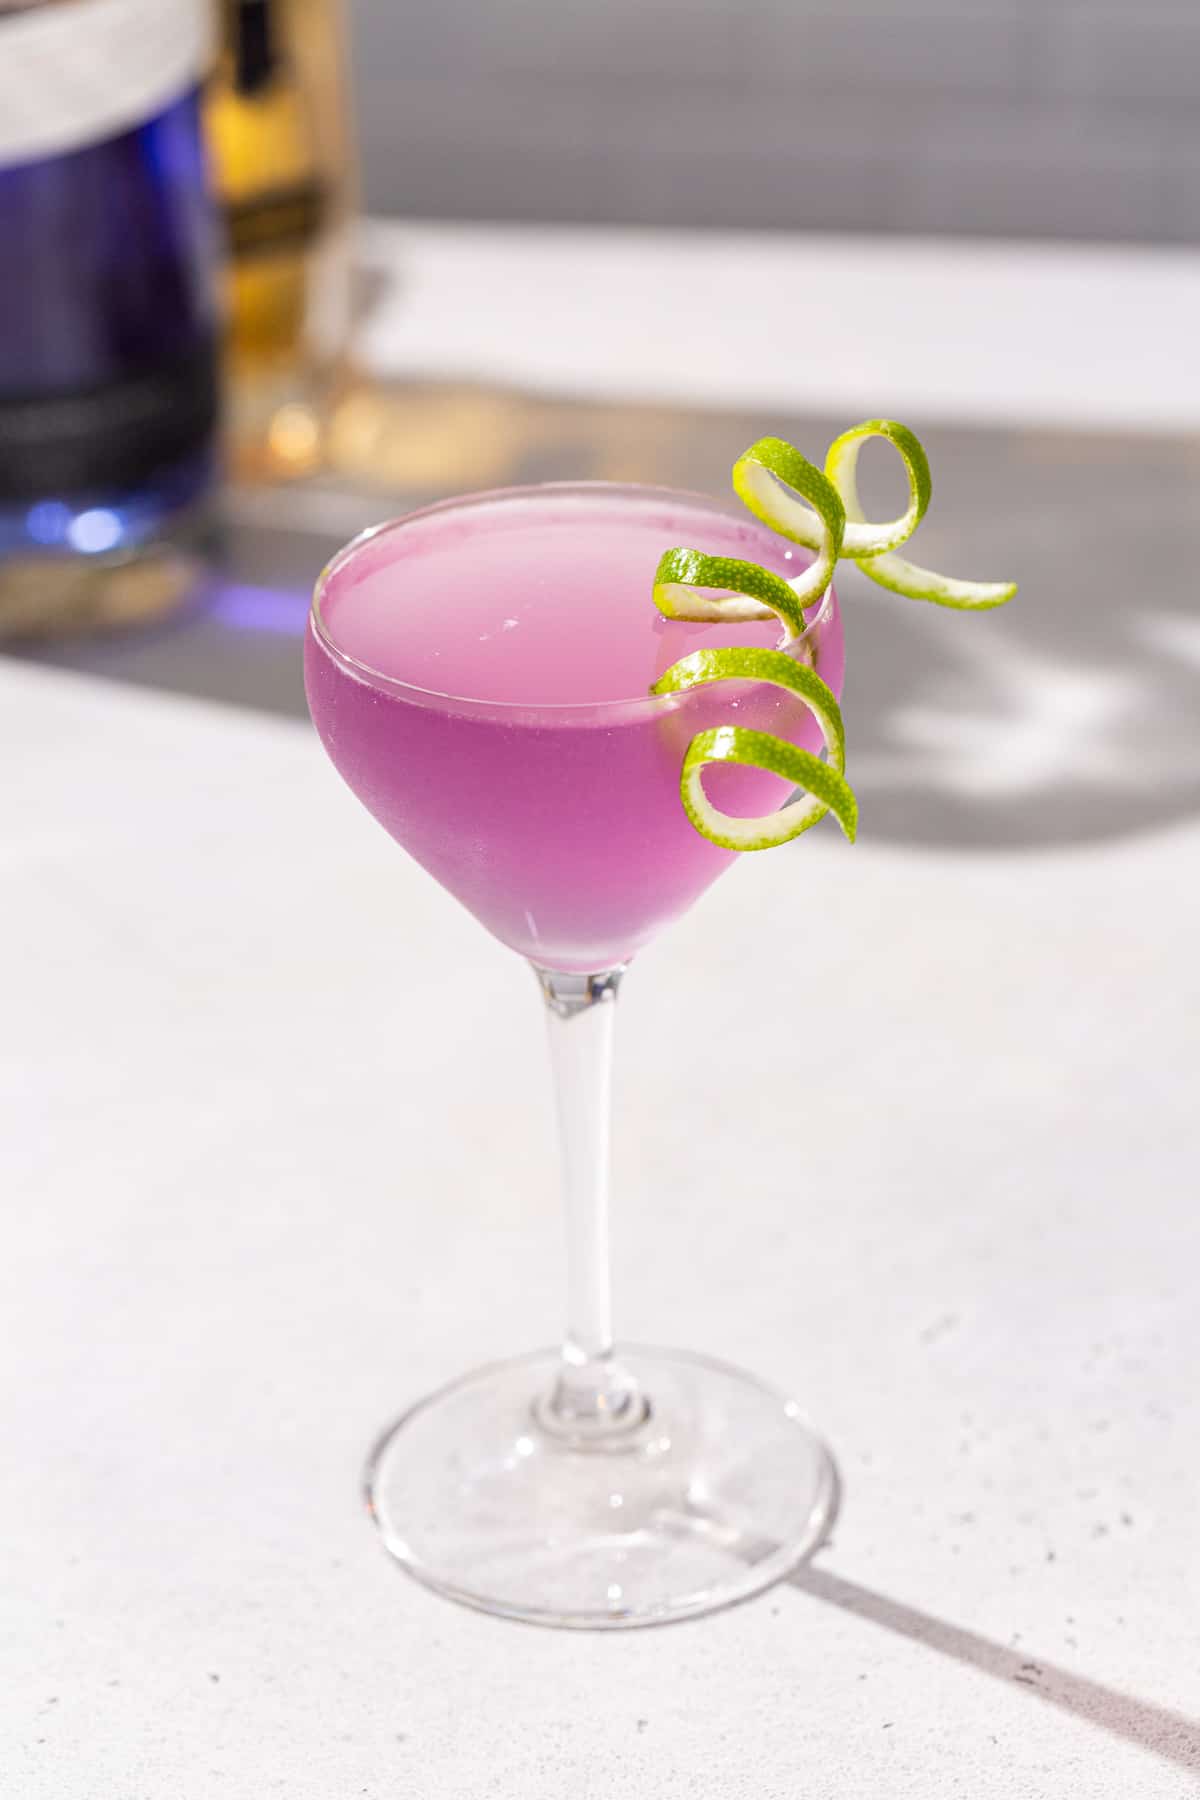 French Gimlet cocktail on a countertop in a stemmed cocktail glass with a long curly lime peel garnish. The drink is purple in color. There is a bottle of empress gin and st germain in the background.